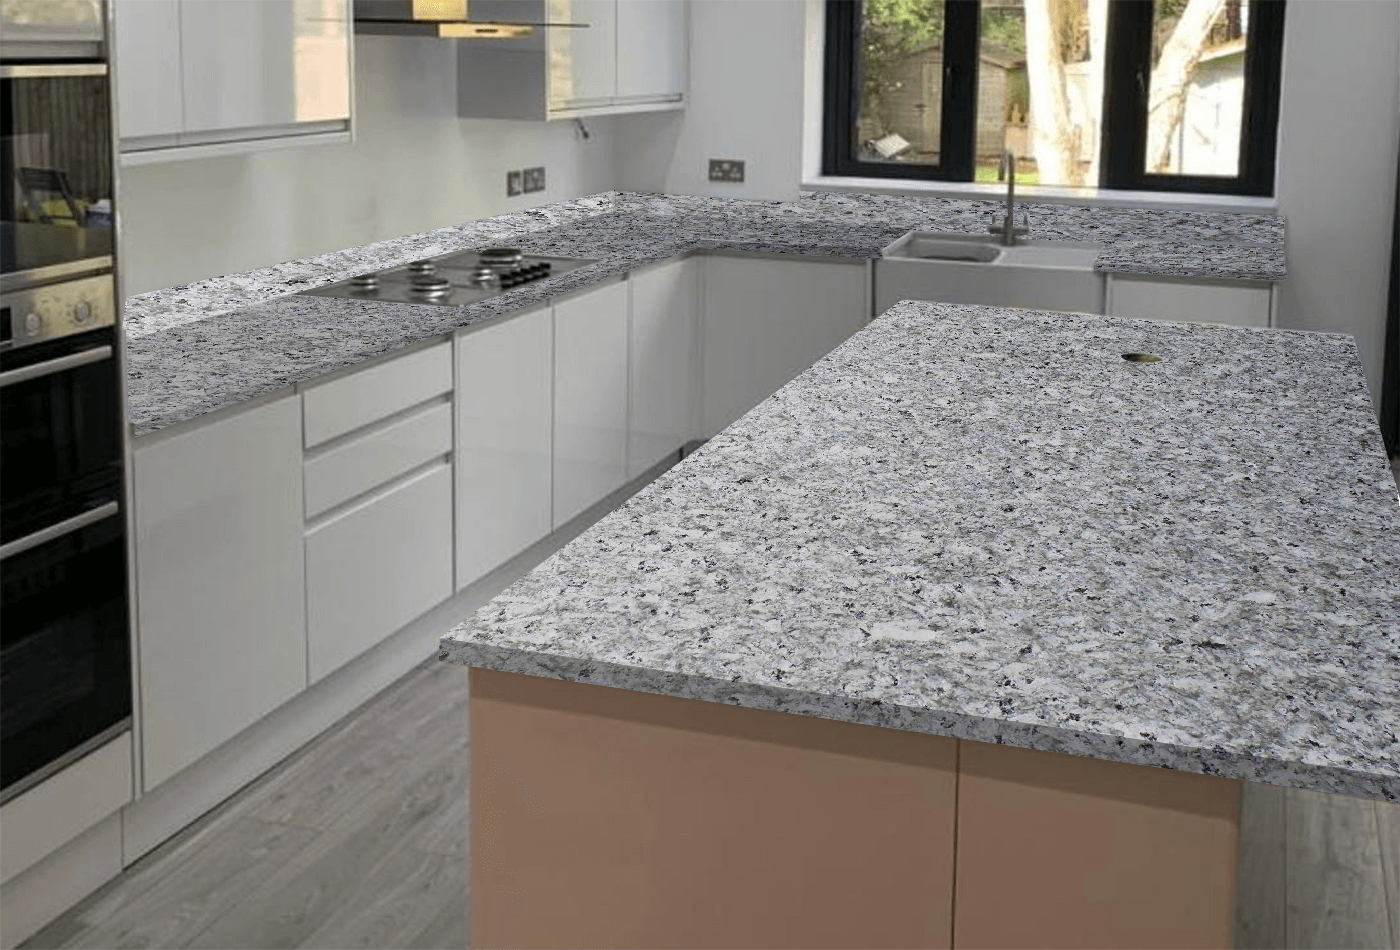 Is White Granite Right for your kitchen